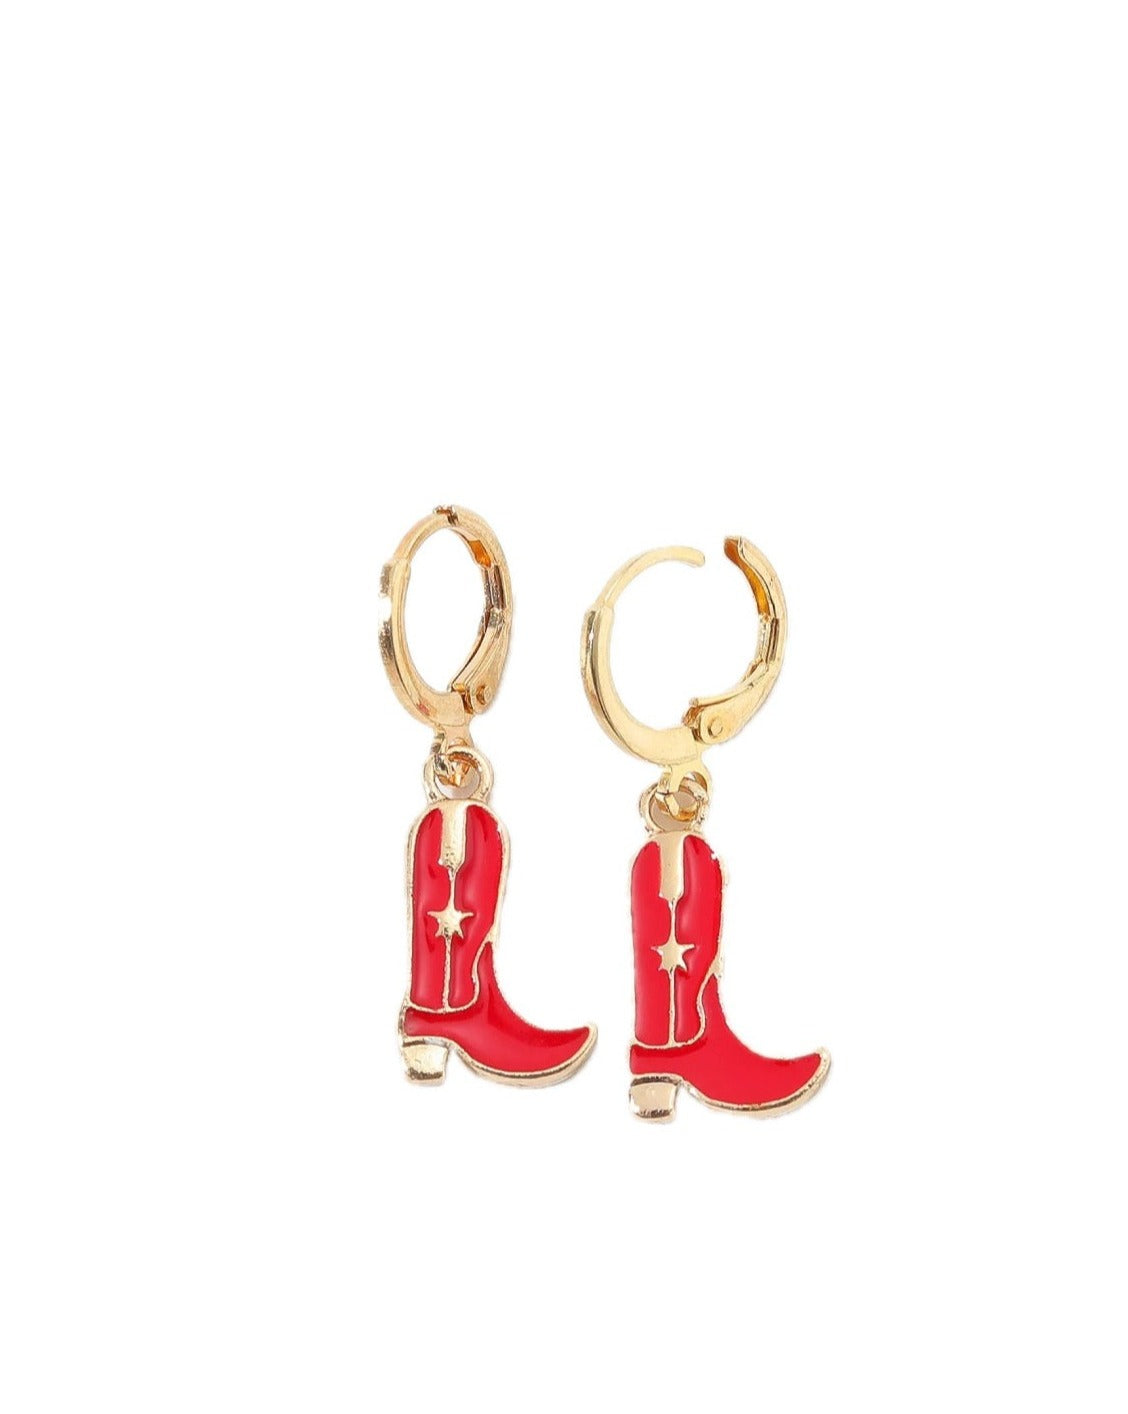 Blakely Rhode Western Cowboy Boot Earring Red Gold